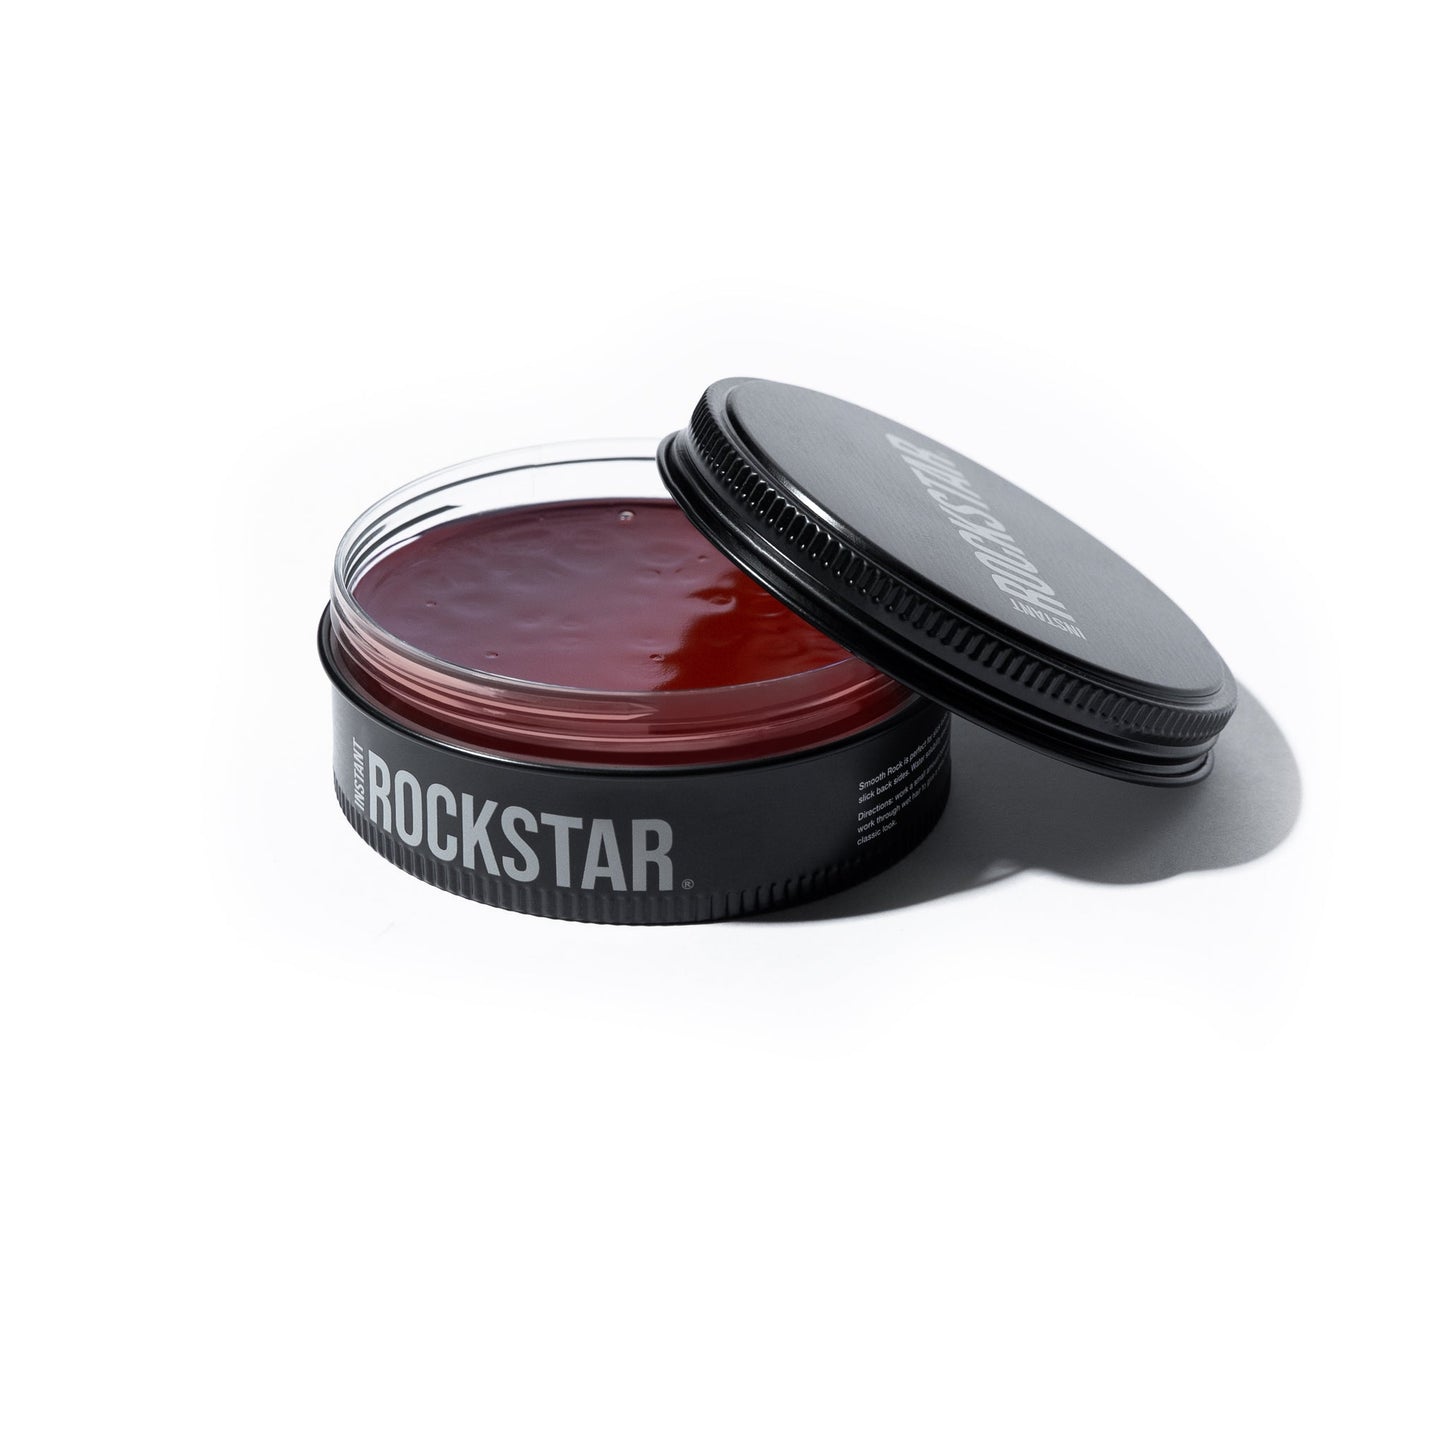 Instant Rockstar Smooth Rock Strong Hold Pomade 100ML